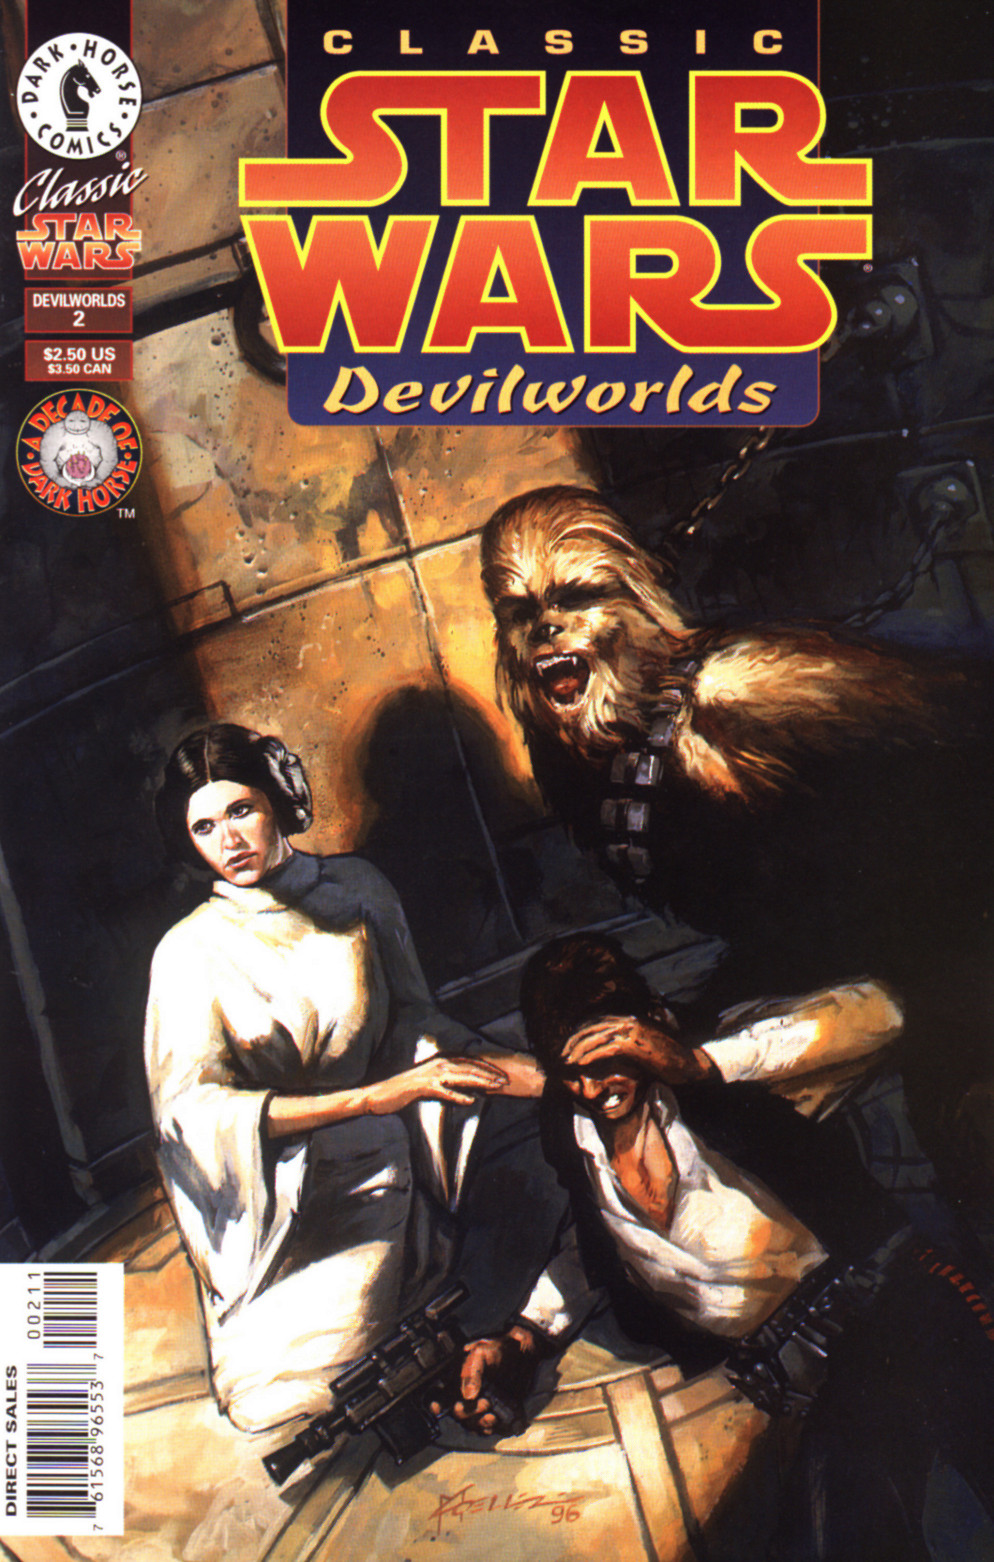 Read online Classic Star Wars: Devilworlds comic -  Issue #2 - 1